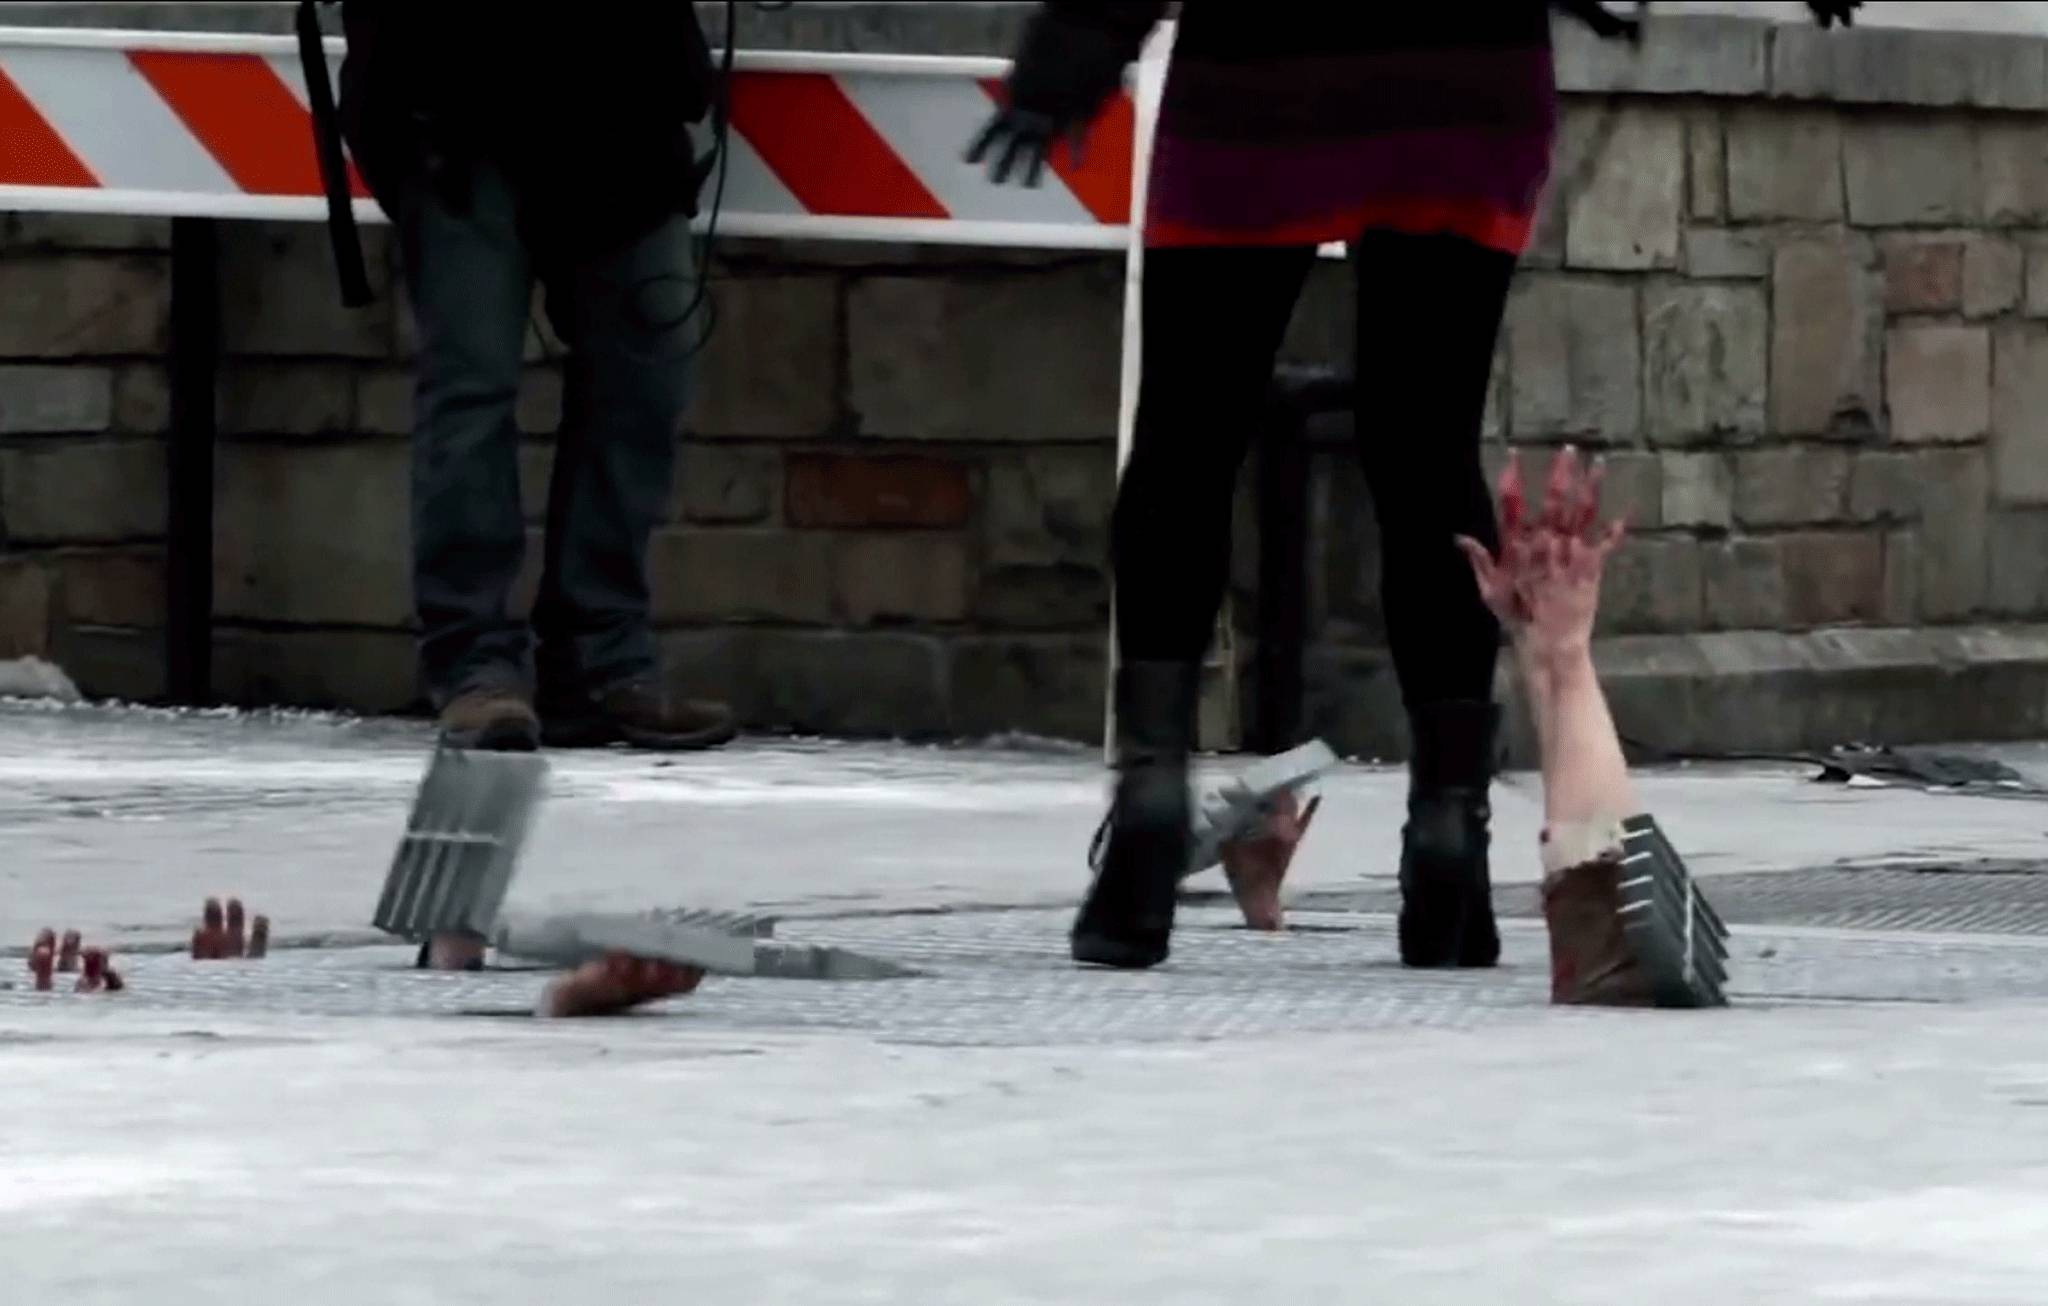 The Walking Dead sends hungry zombies to infest a sidewalk grate